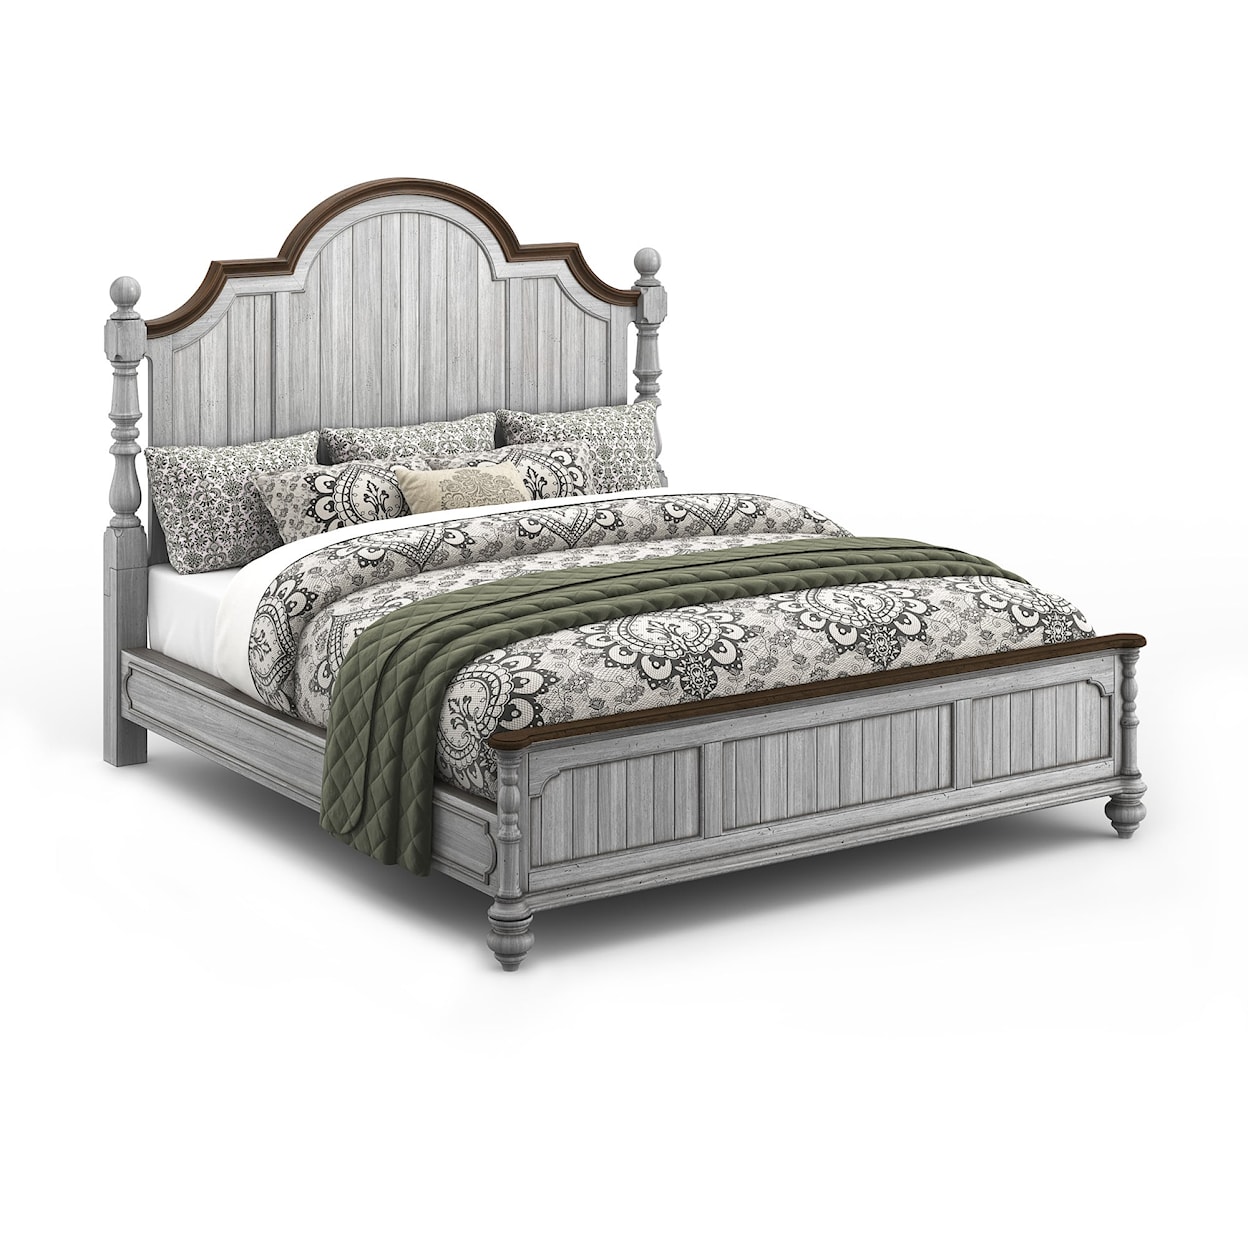 Wynwood, A Flexsteel Company Plymouth Cal King Poster Bed